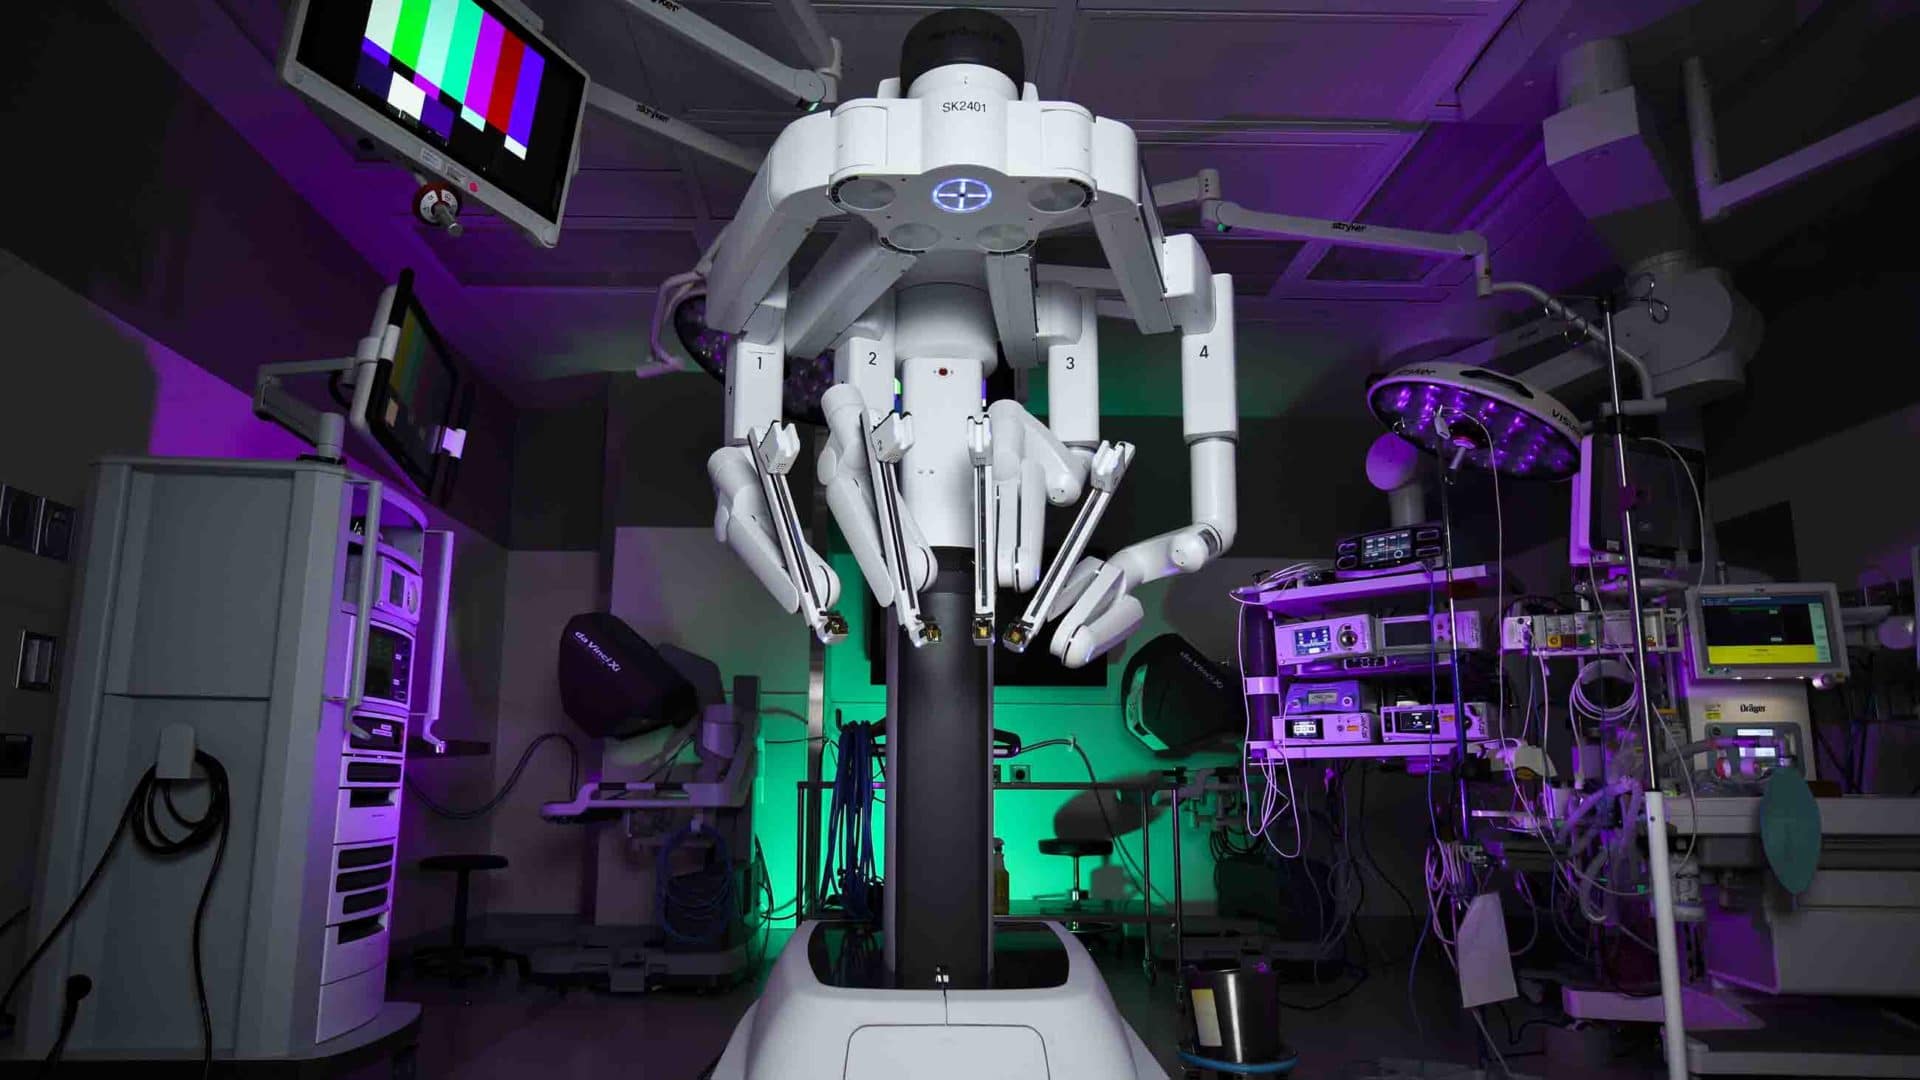 The da Vinci, manufactured by Intuitive Surgical, is the most popular surgical robot in use today.